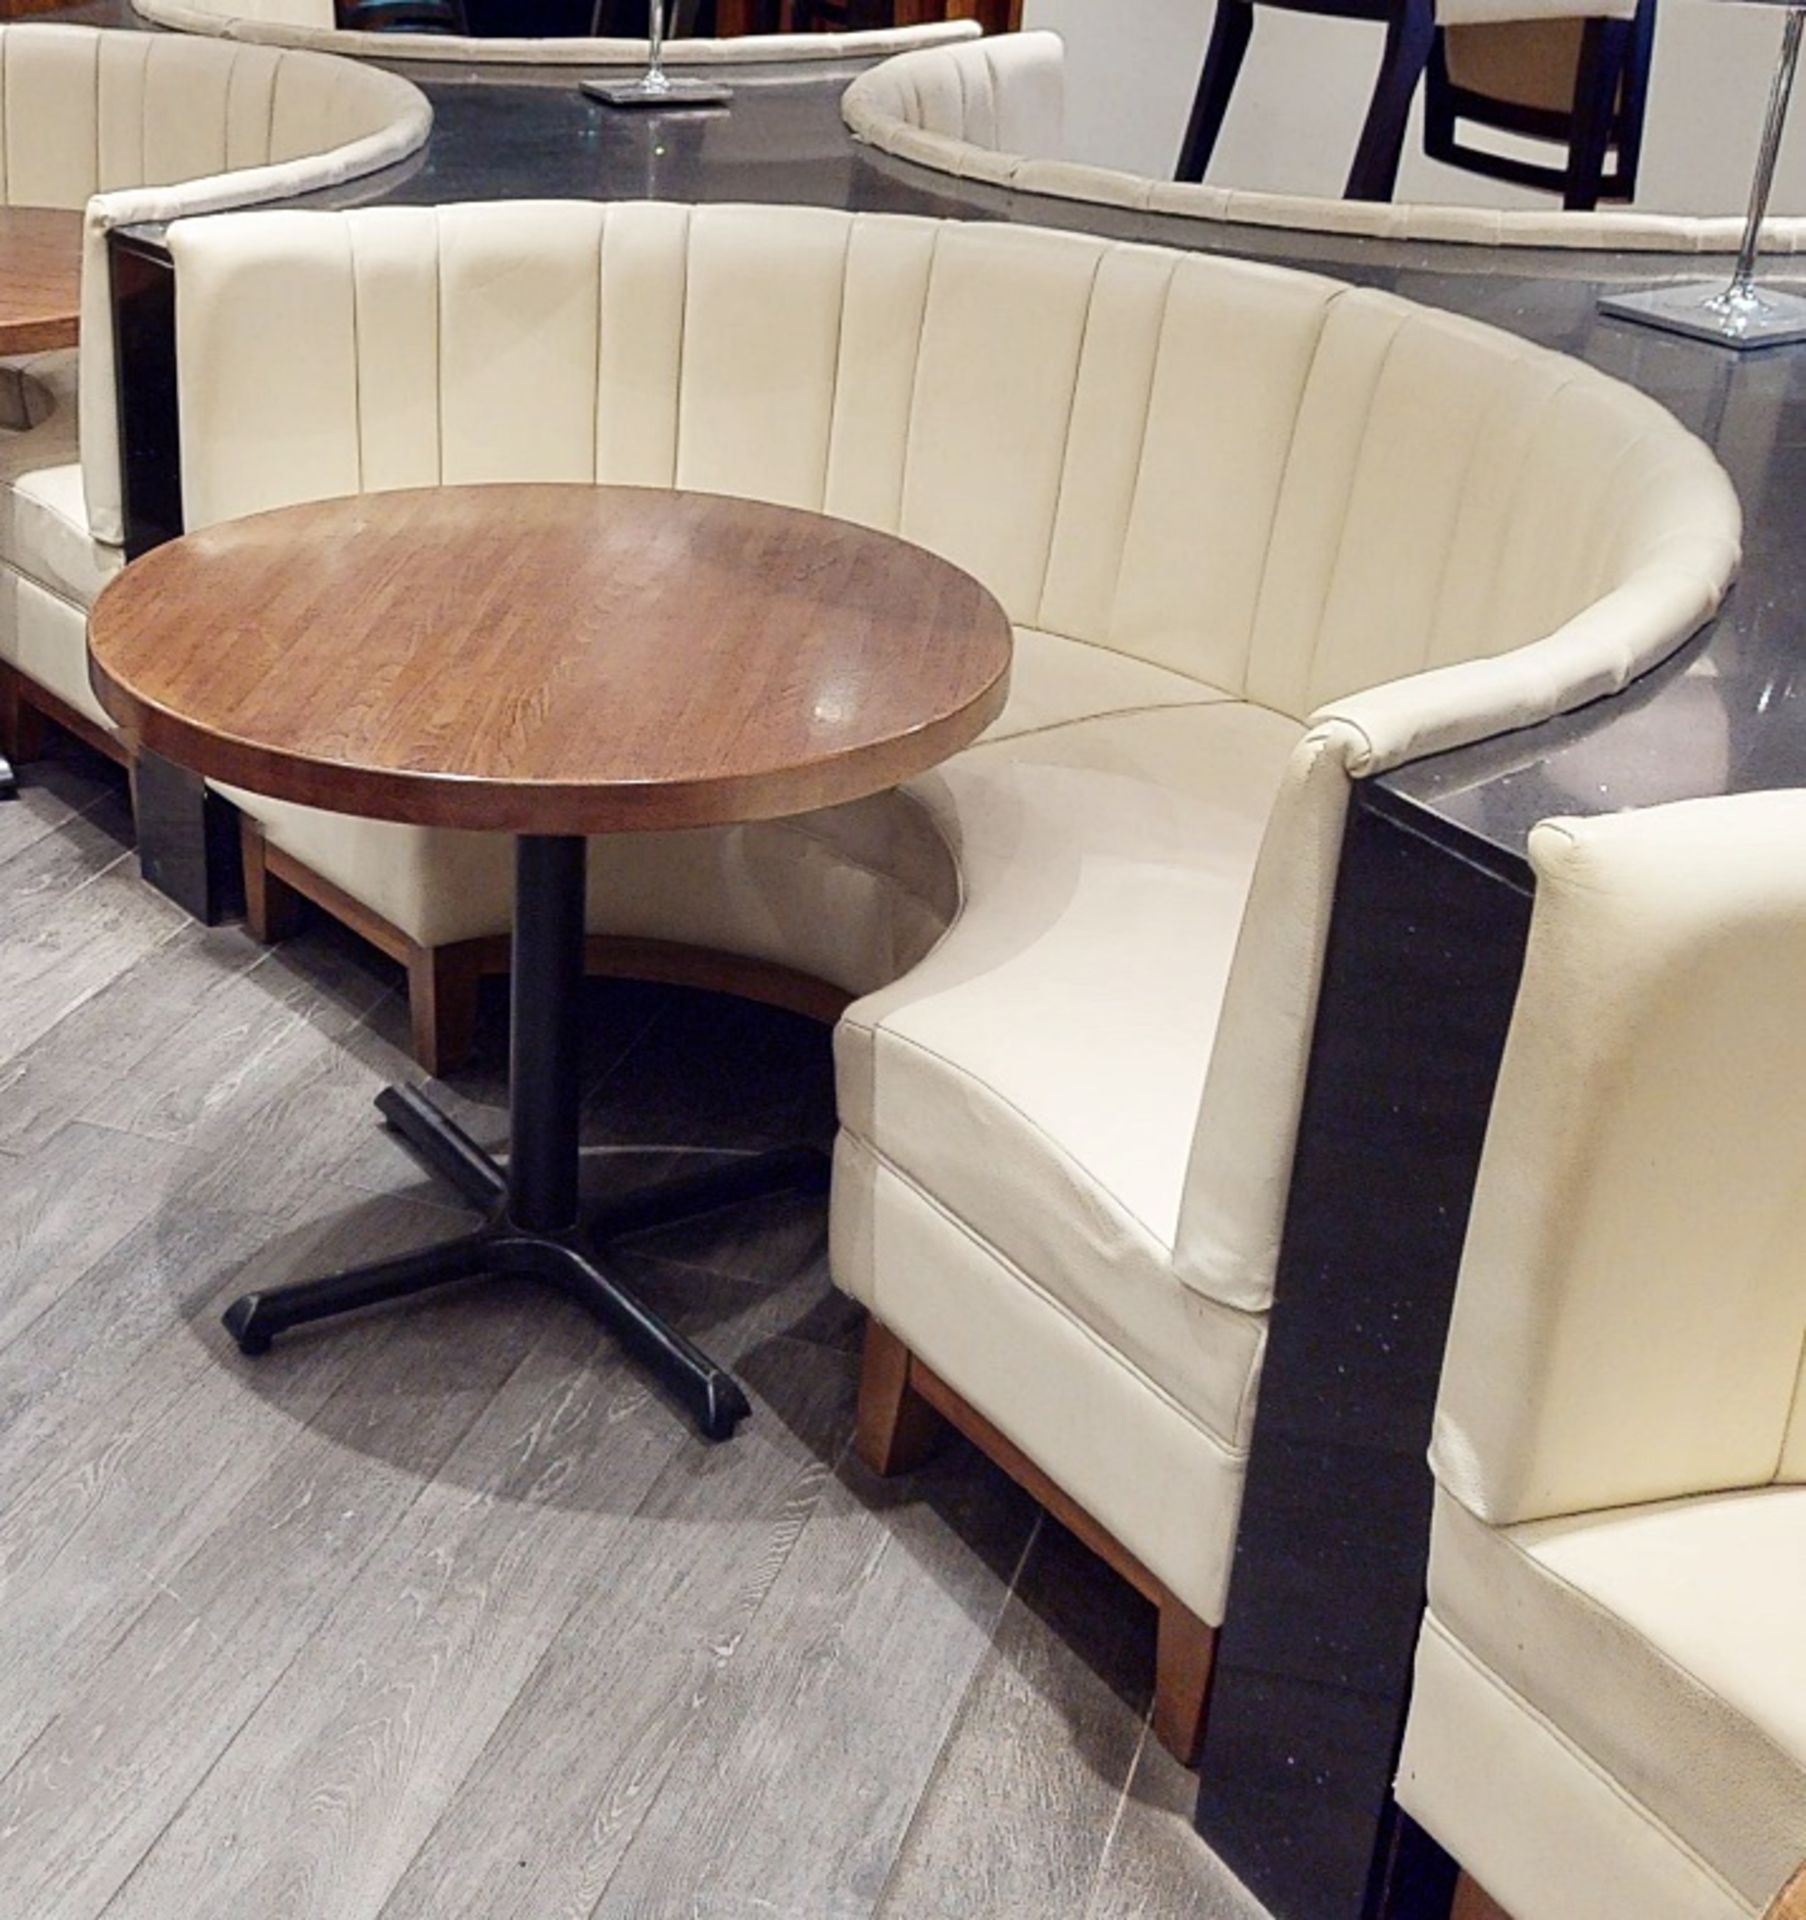 1 x Restaurant C-Shaped Seating Booth, Upholstered In A Cream Faux Leather, With A Pleated High Back